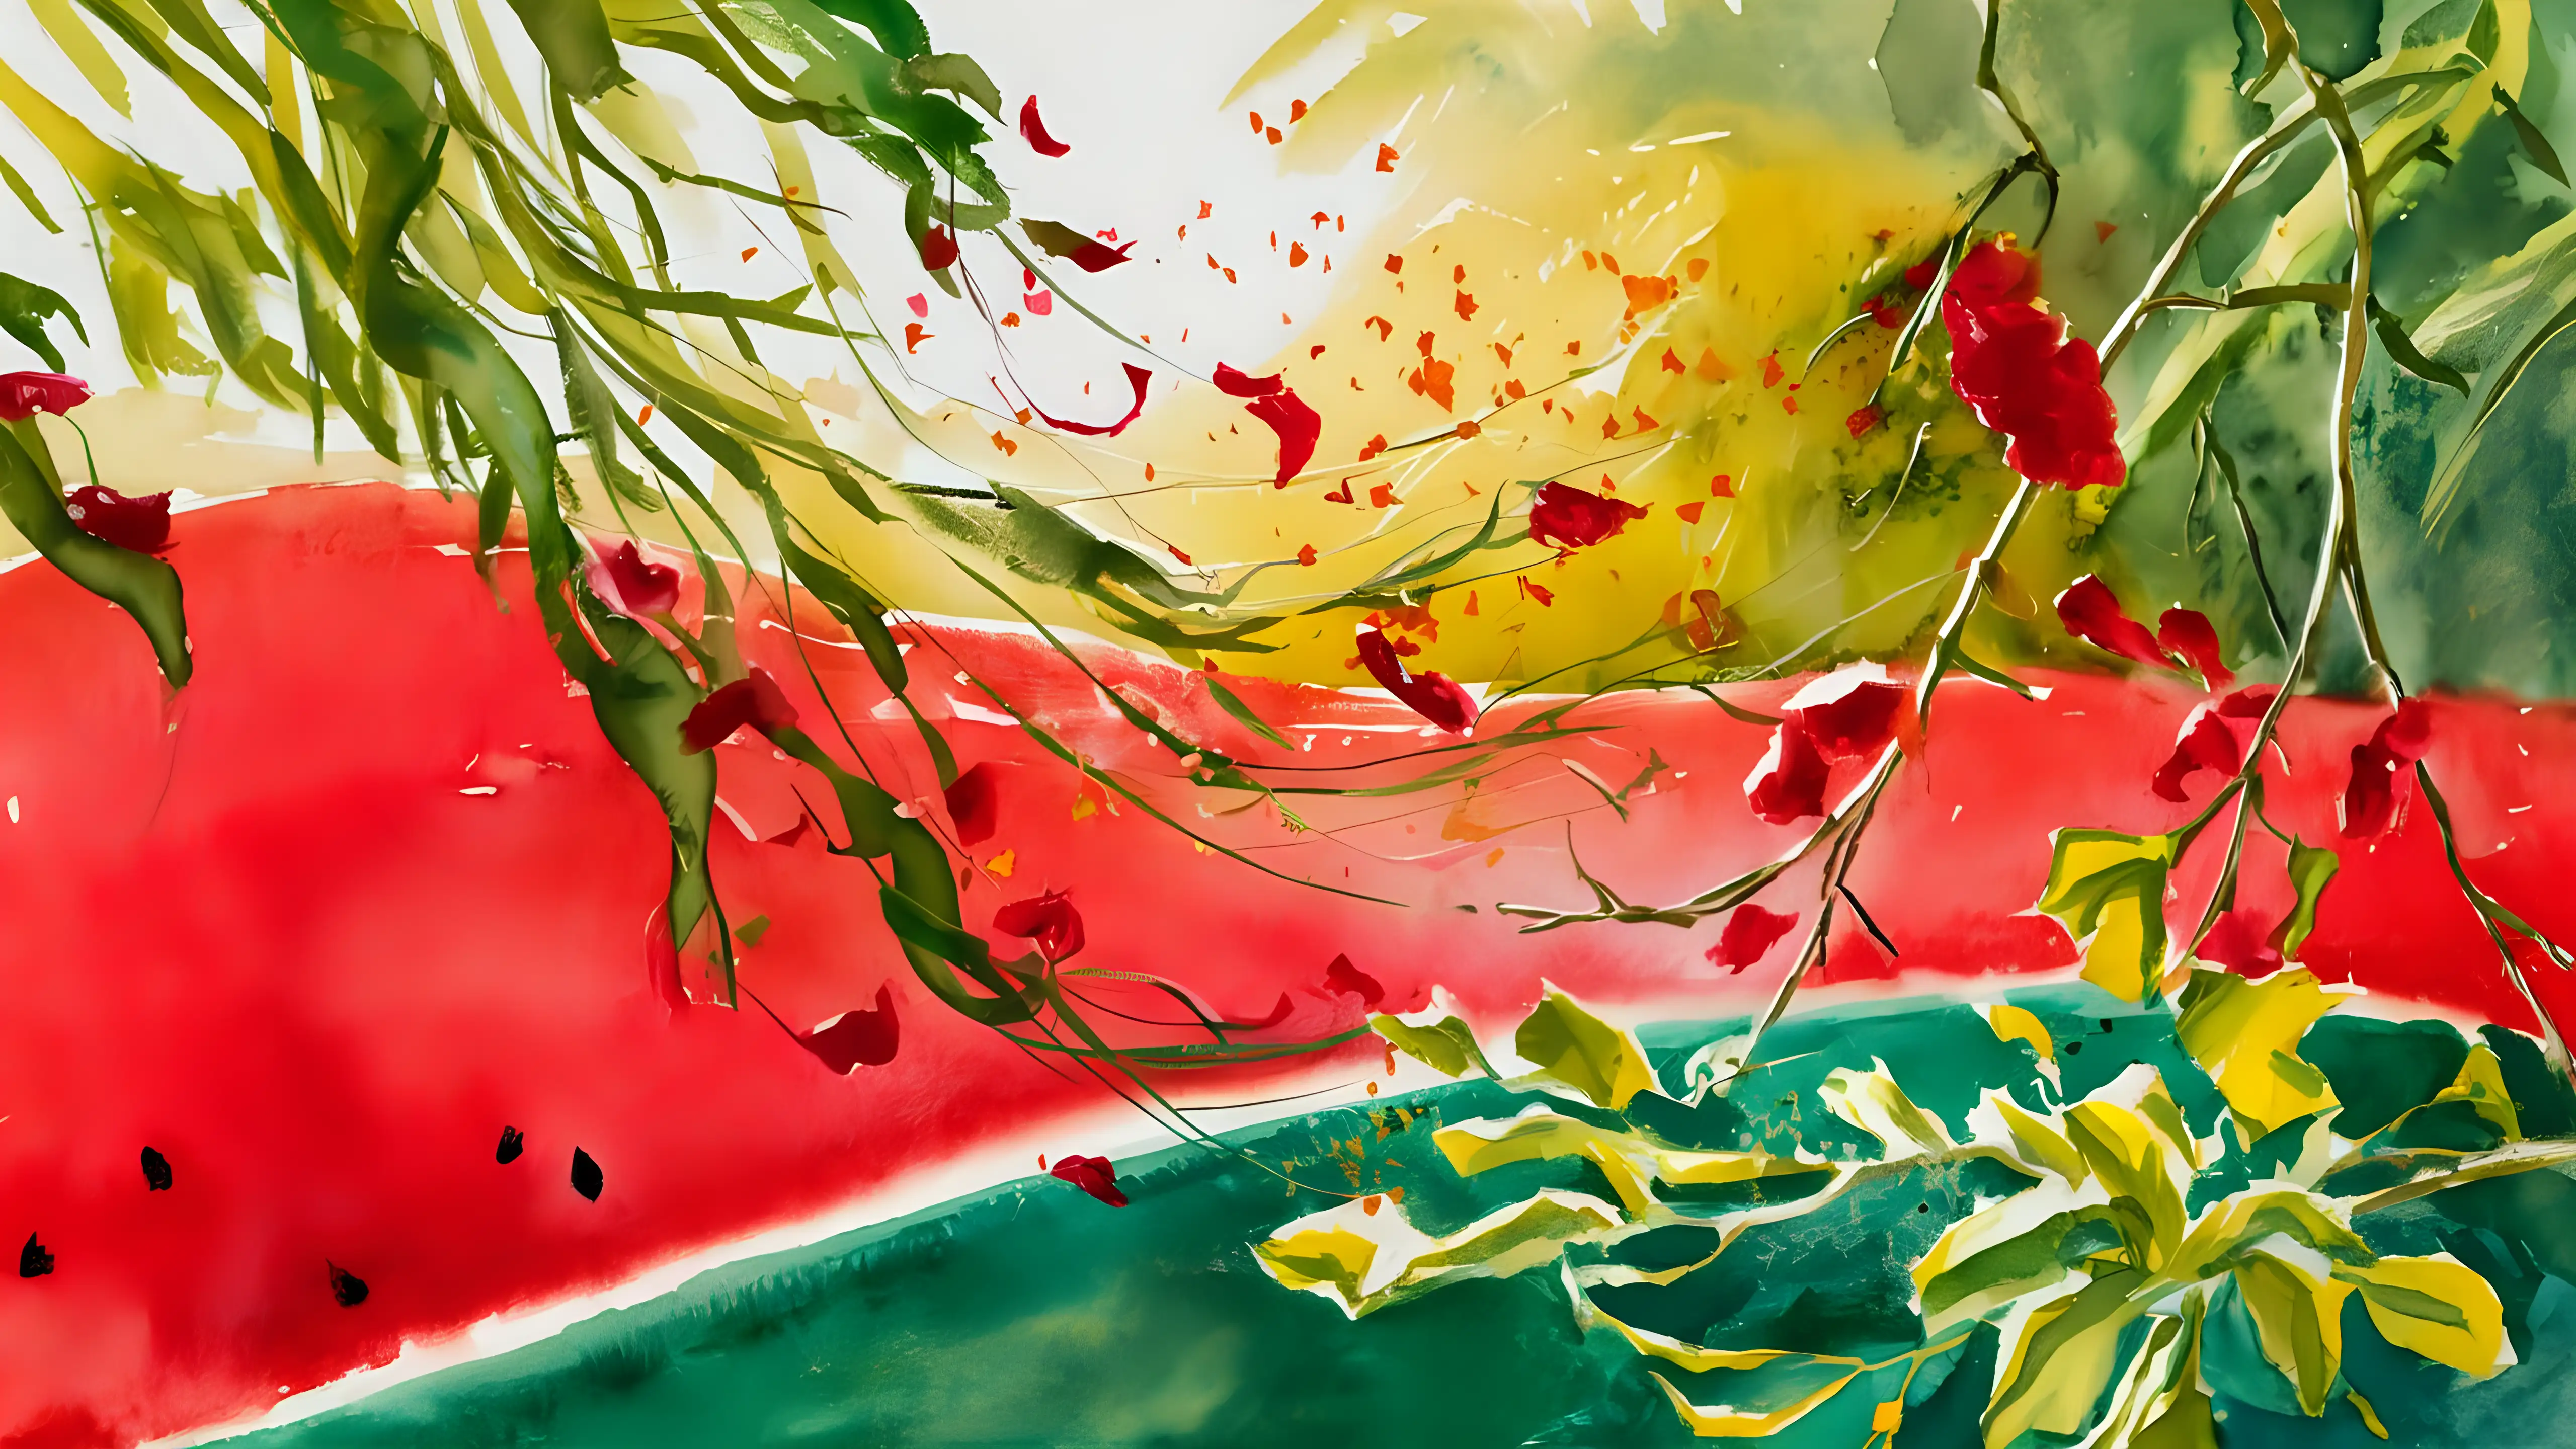 Summer Breeze Red and Green Smeared Watercolor with Sparkling Powder